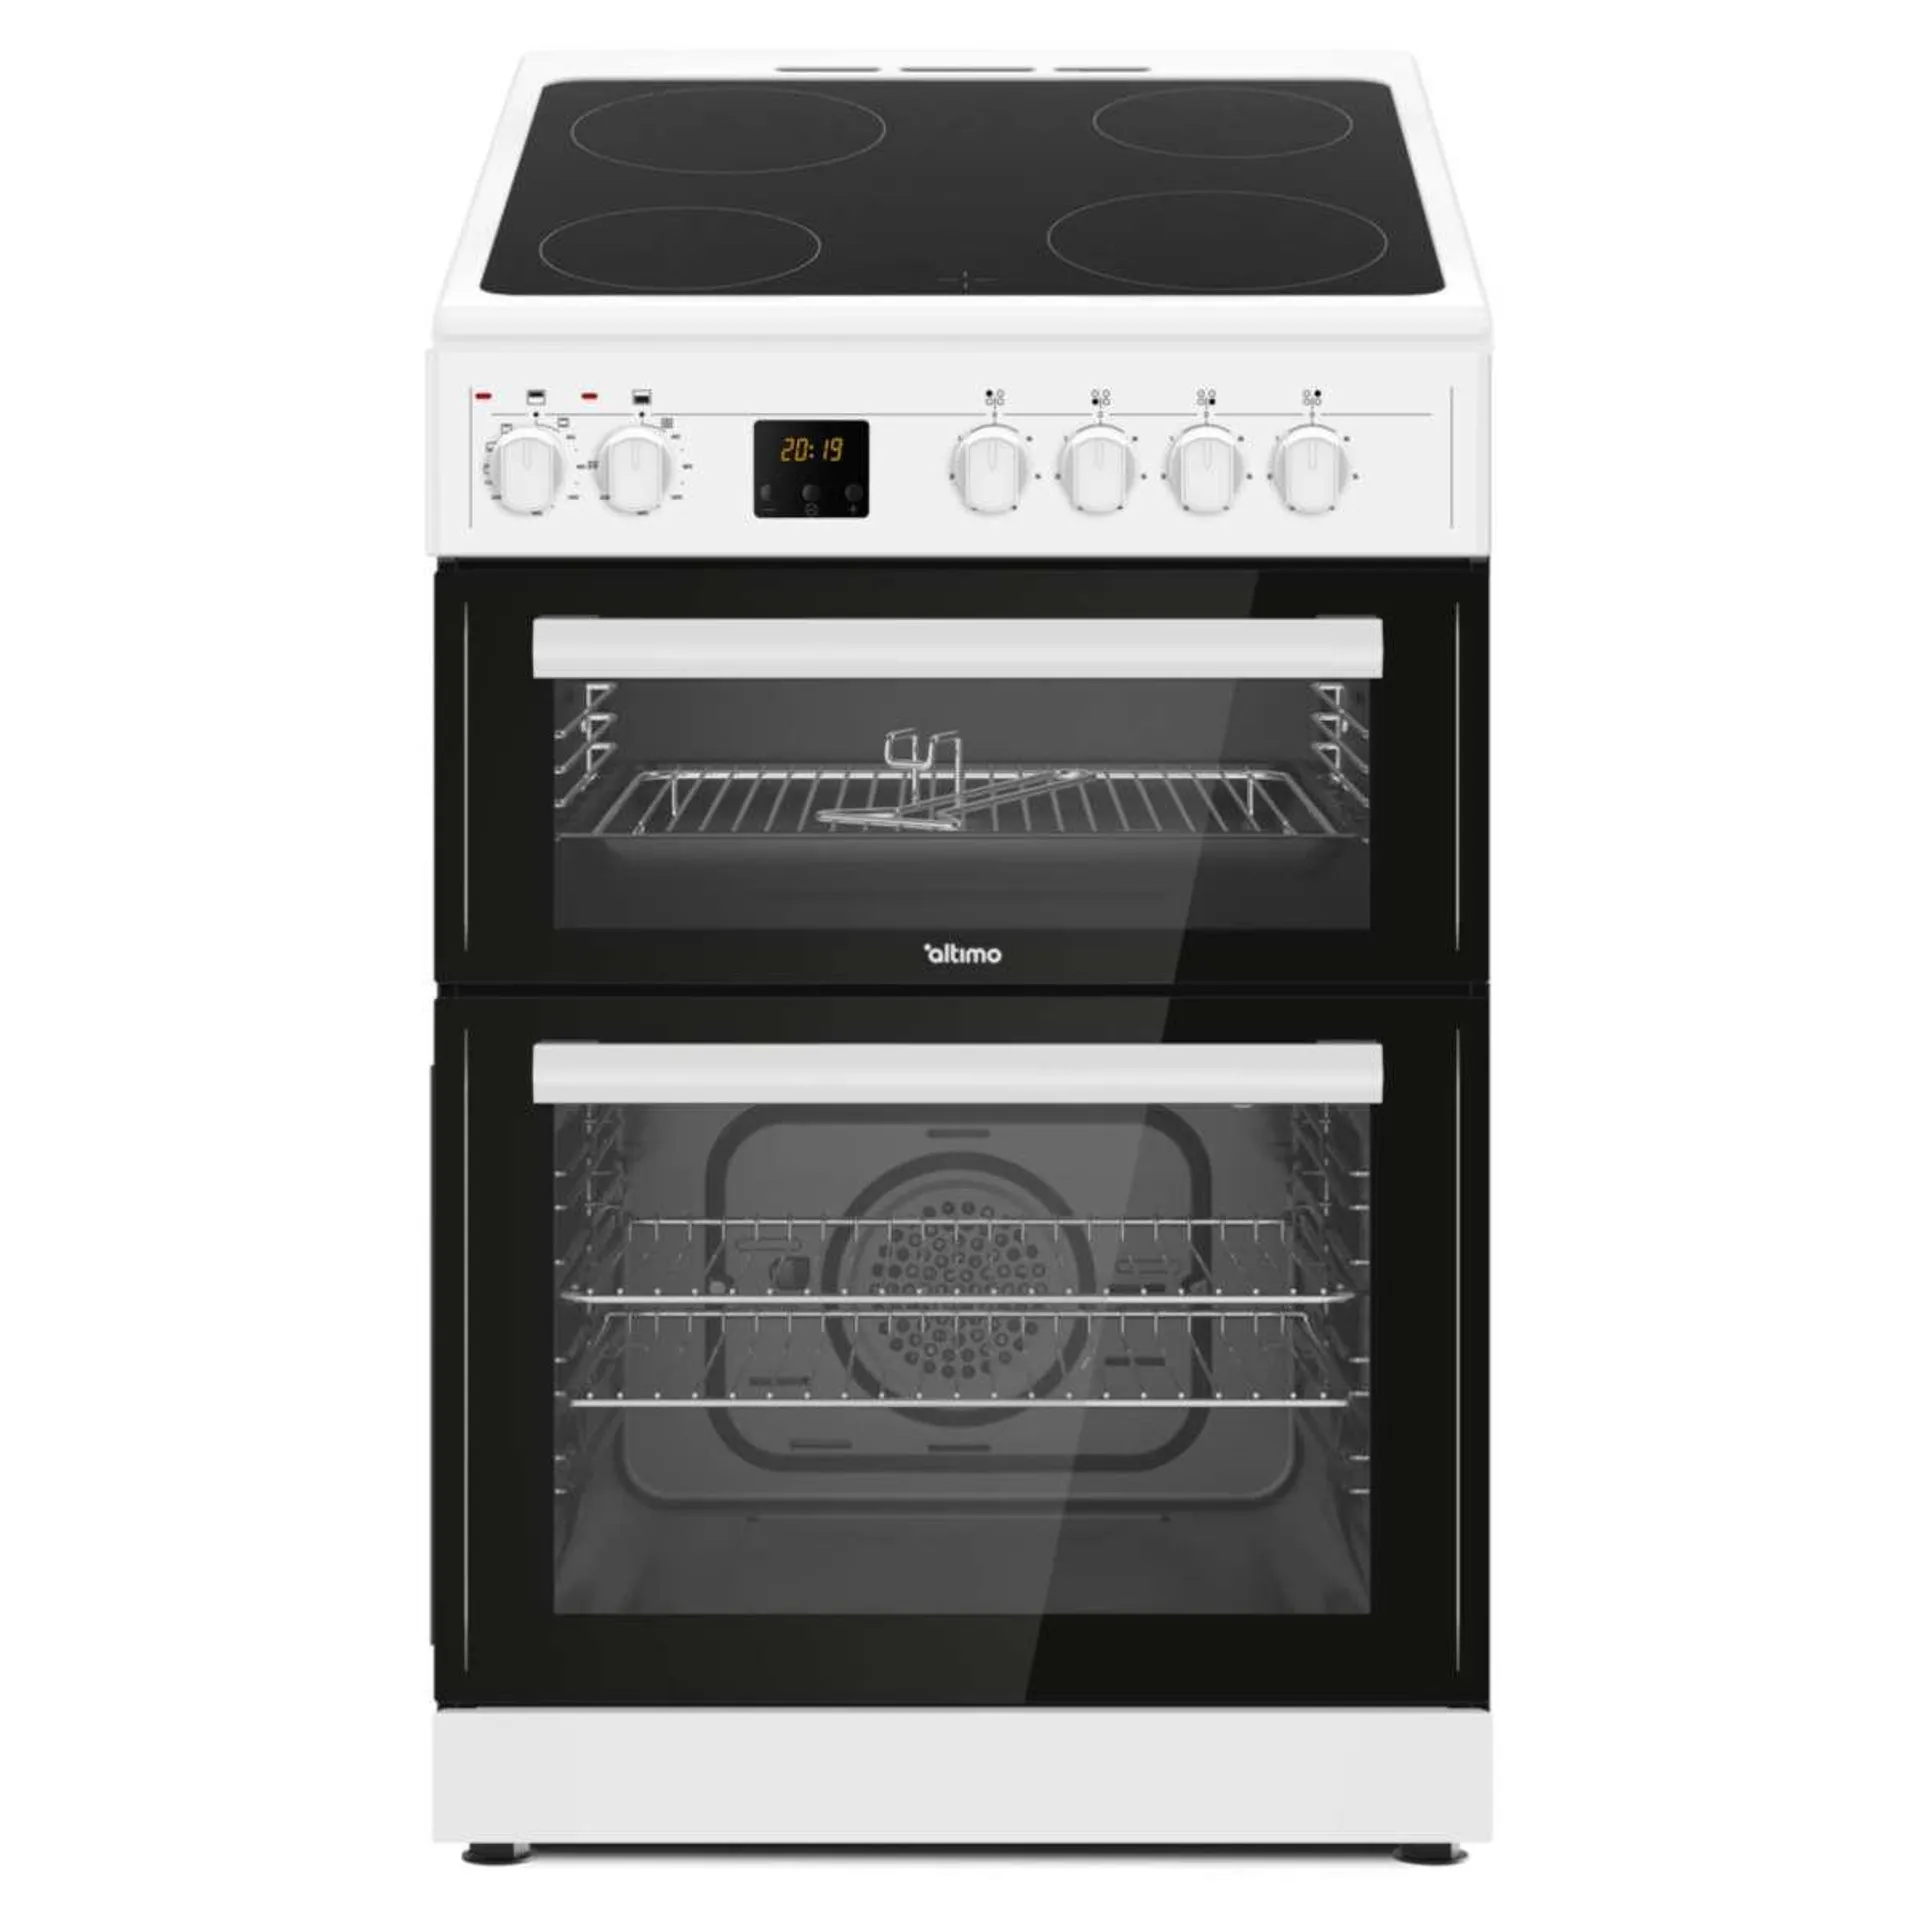 600mm Double Oven Cooker with Ceramic Hob